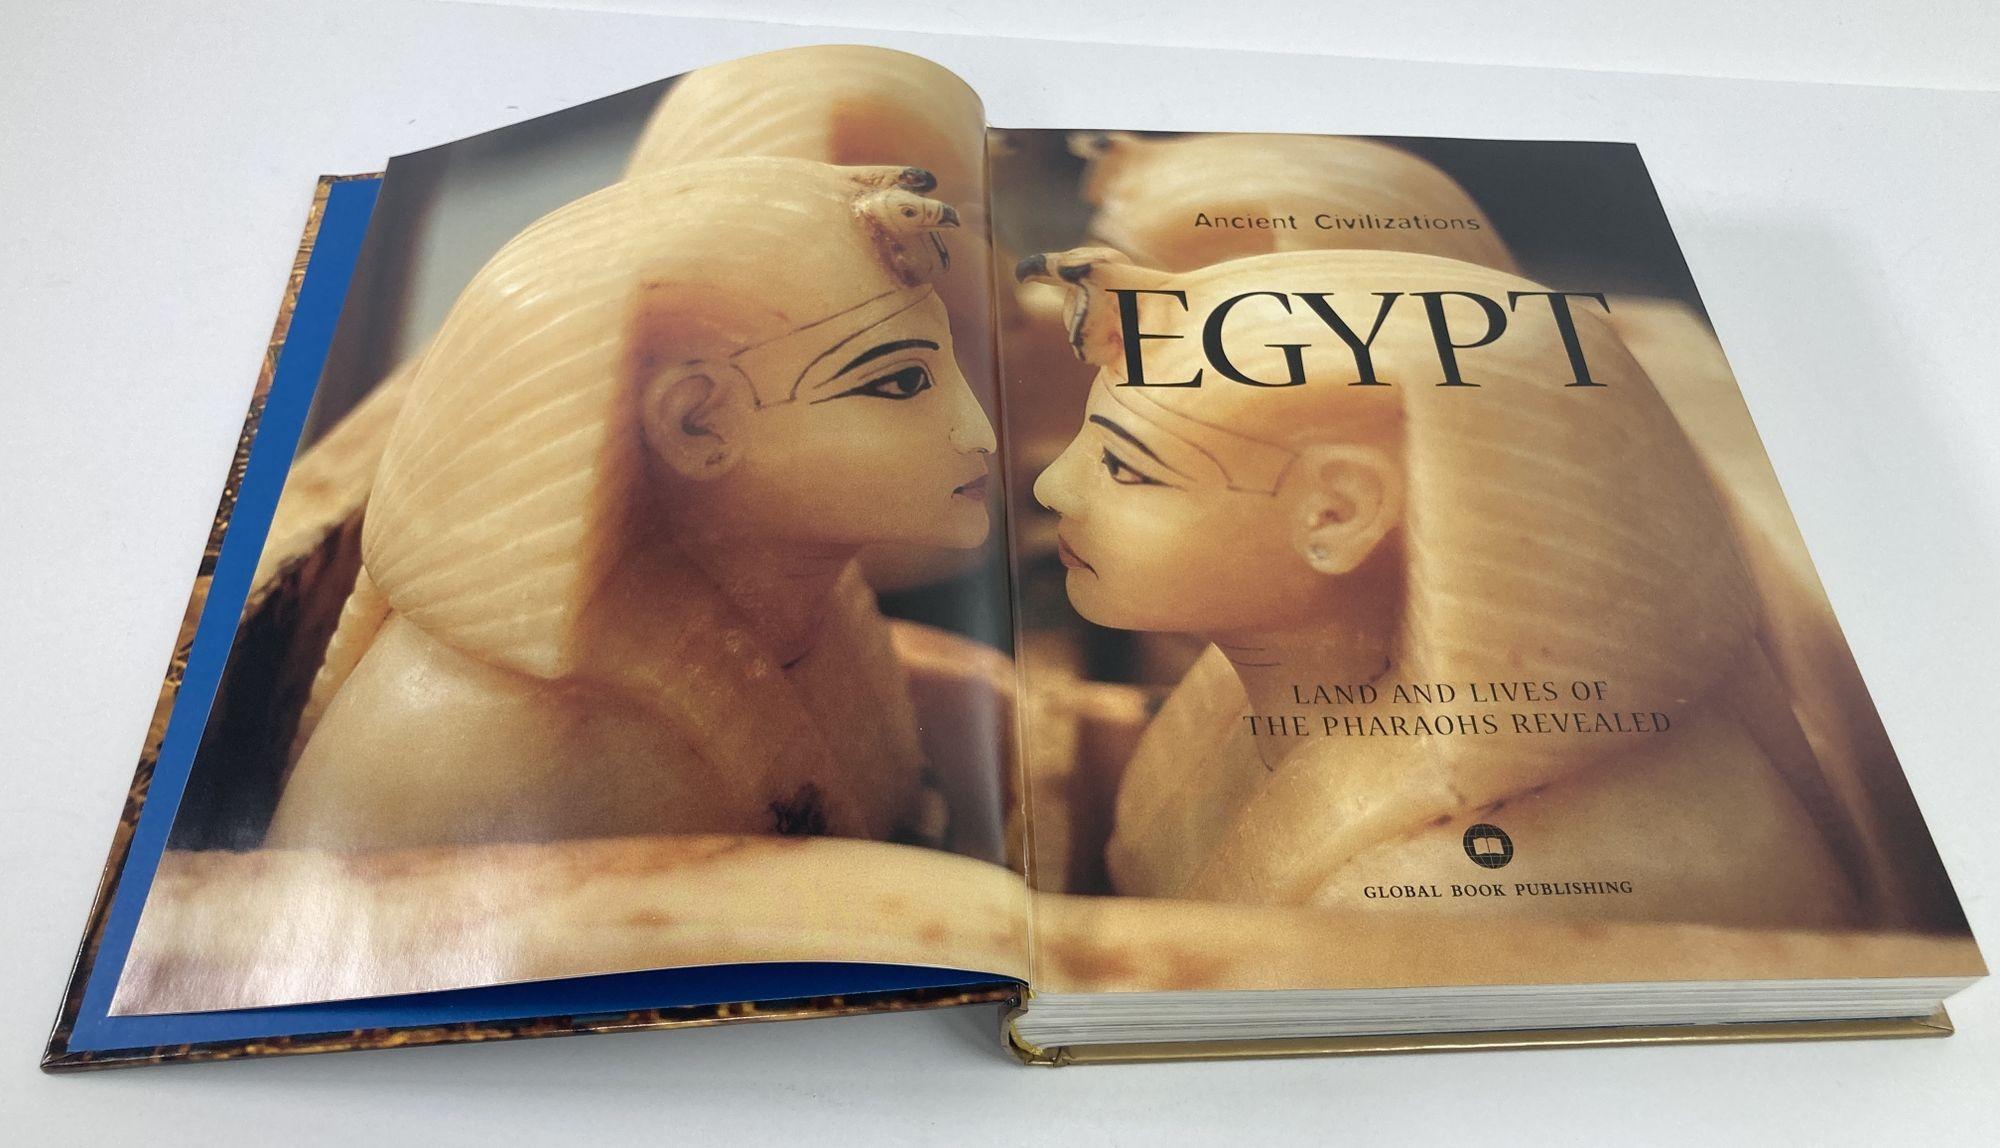 Egyptian Egypt: Land and Lives of the Pharaohs Revealed Hardcover Book by Cheryl Perry For Sale